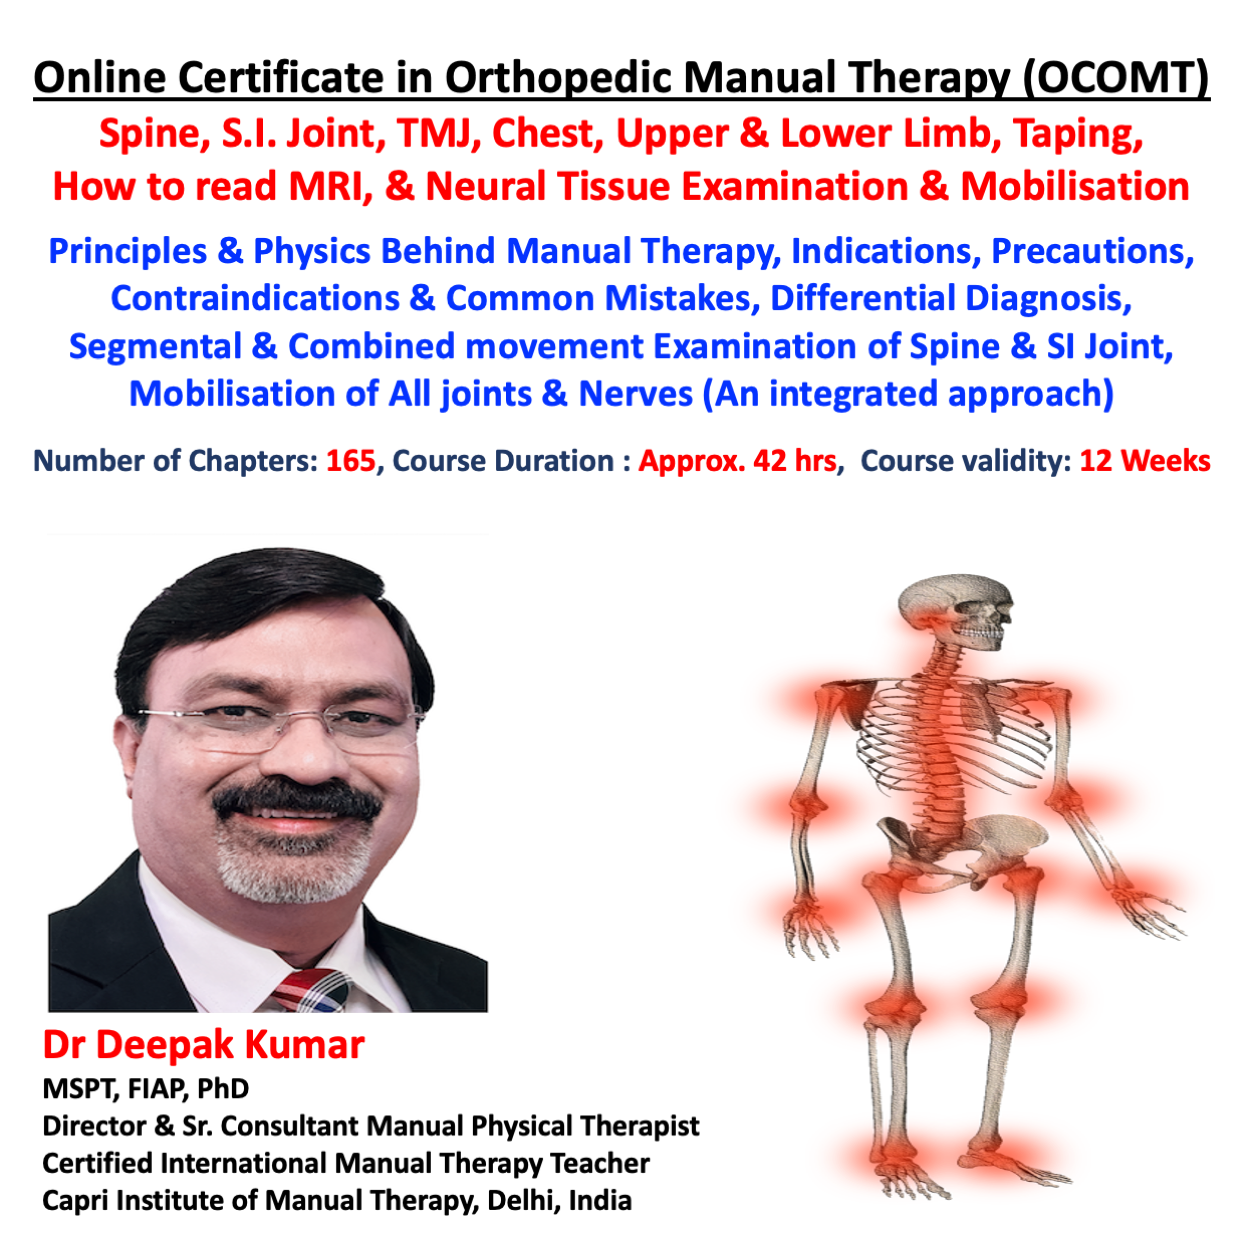 Online Certificate in Orthopaedic Manual Therapy